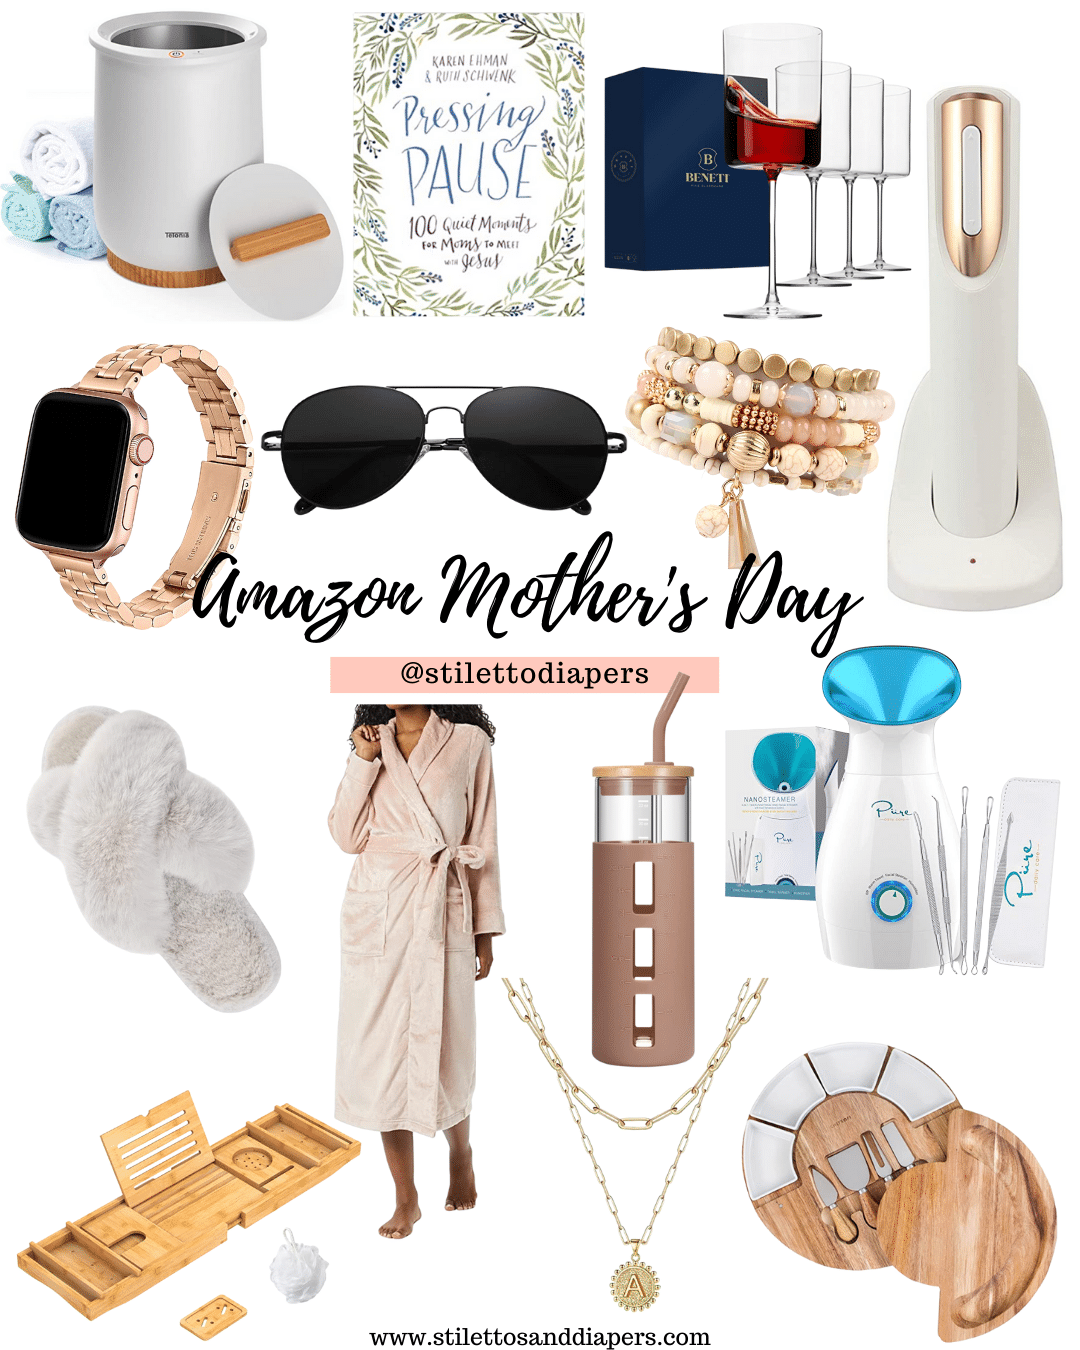 Amazon Mother's Day, Last minute gift ideas, Stilettos and Diapers